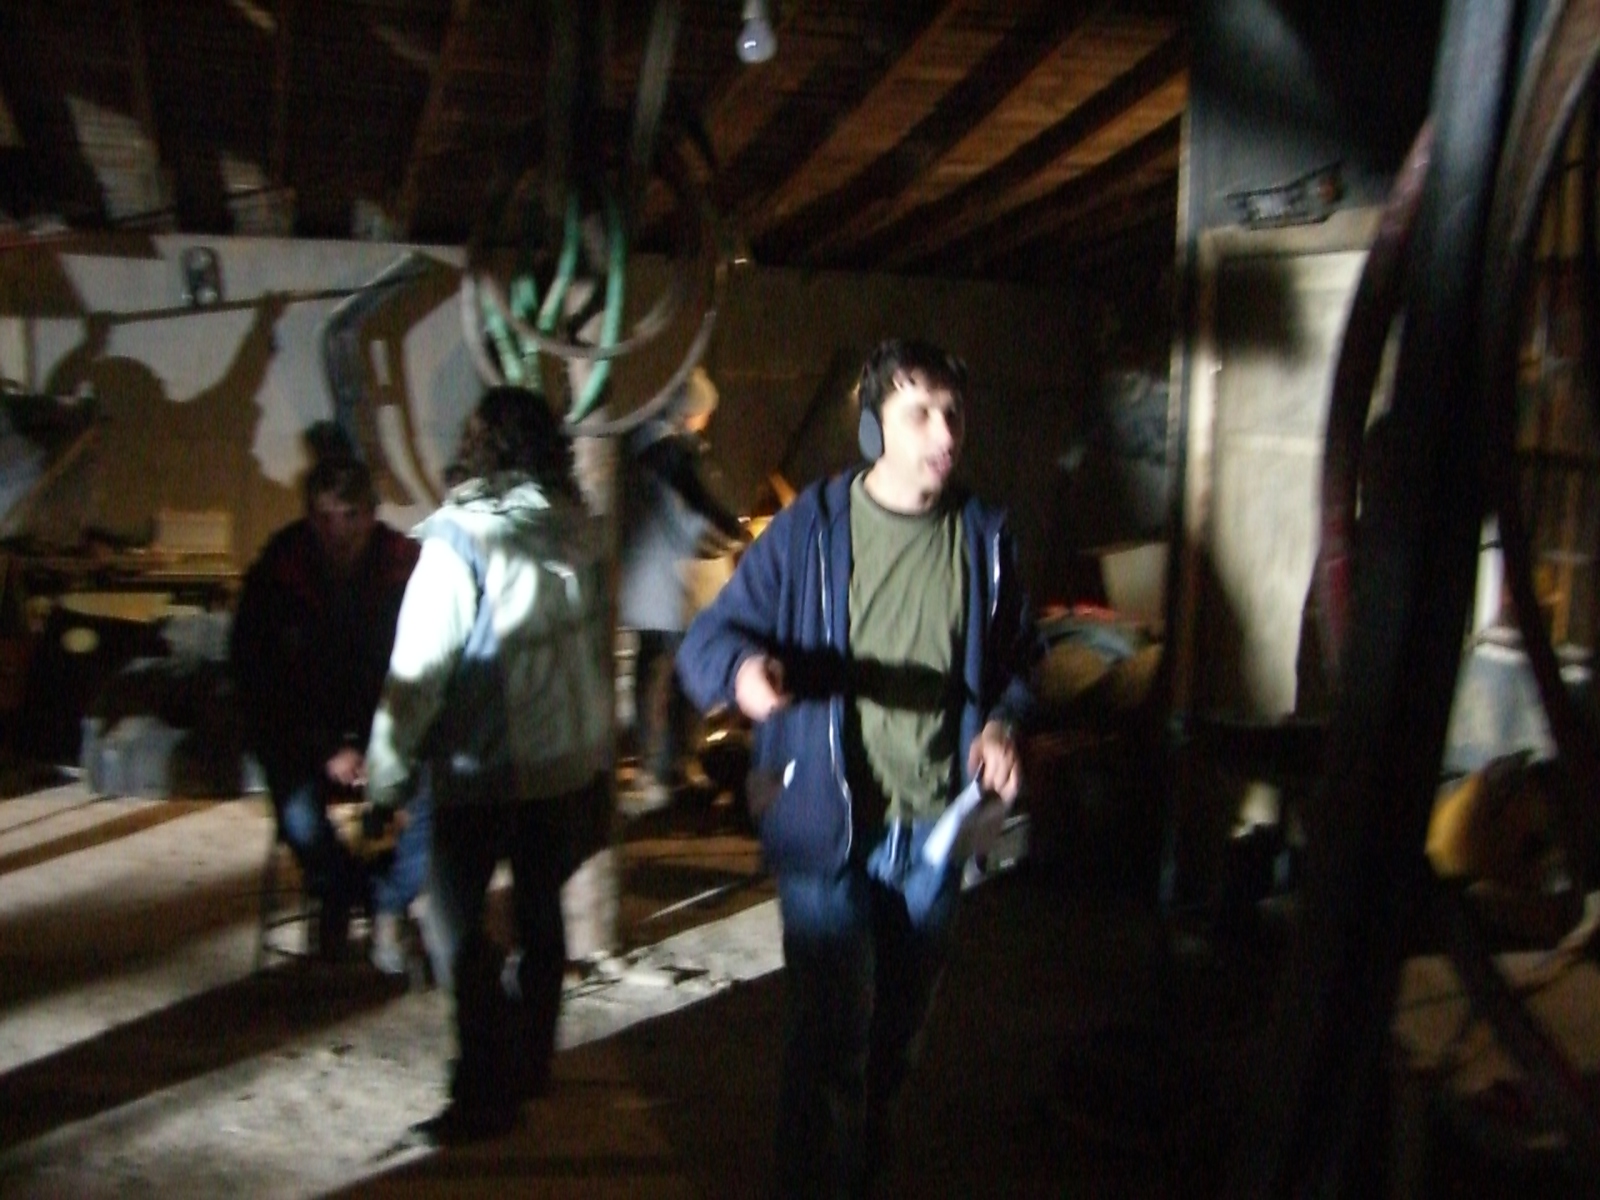 Director and writer Anthony C. Ferrante on set for Headless Horseman in Romania.